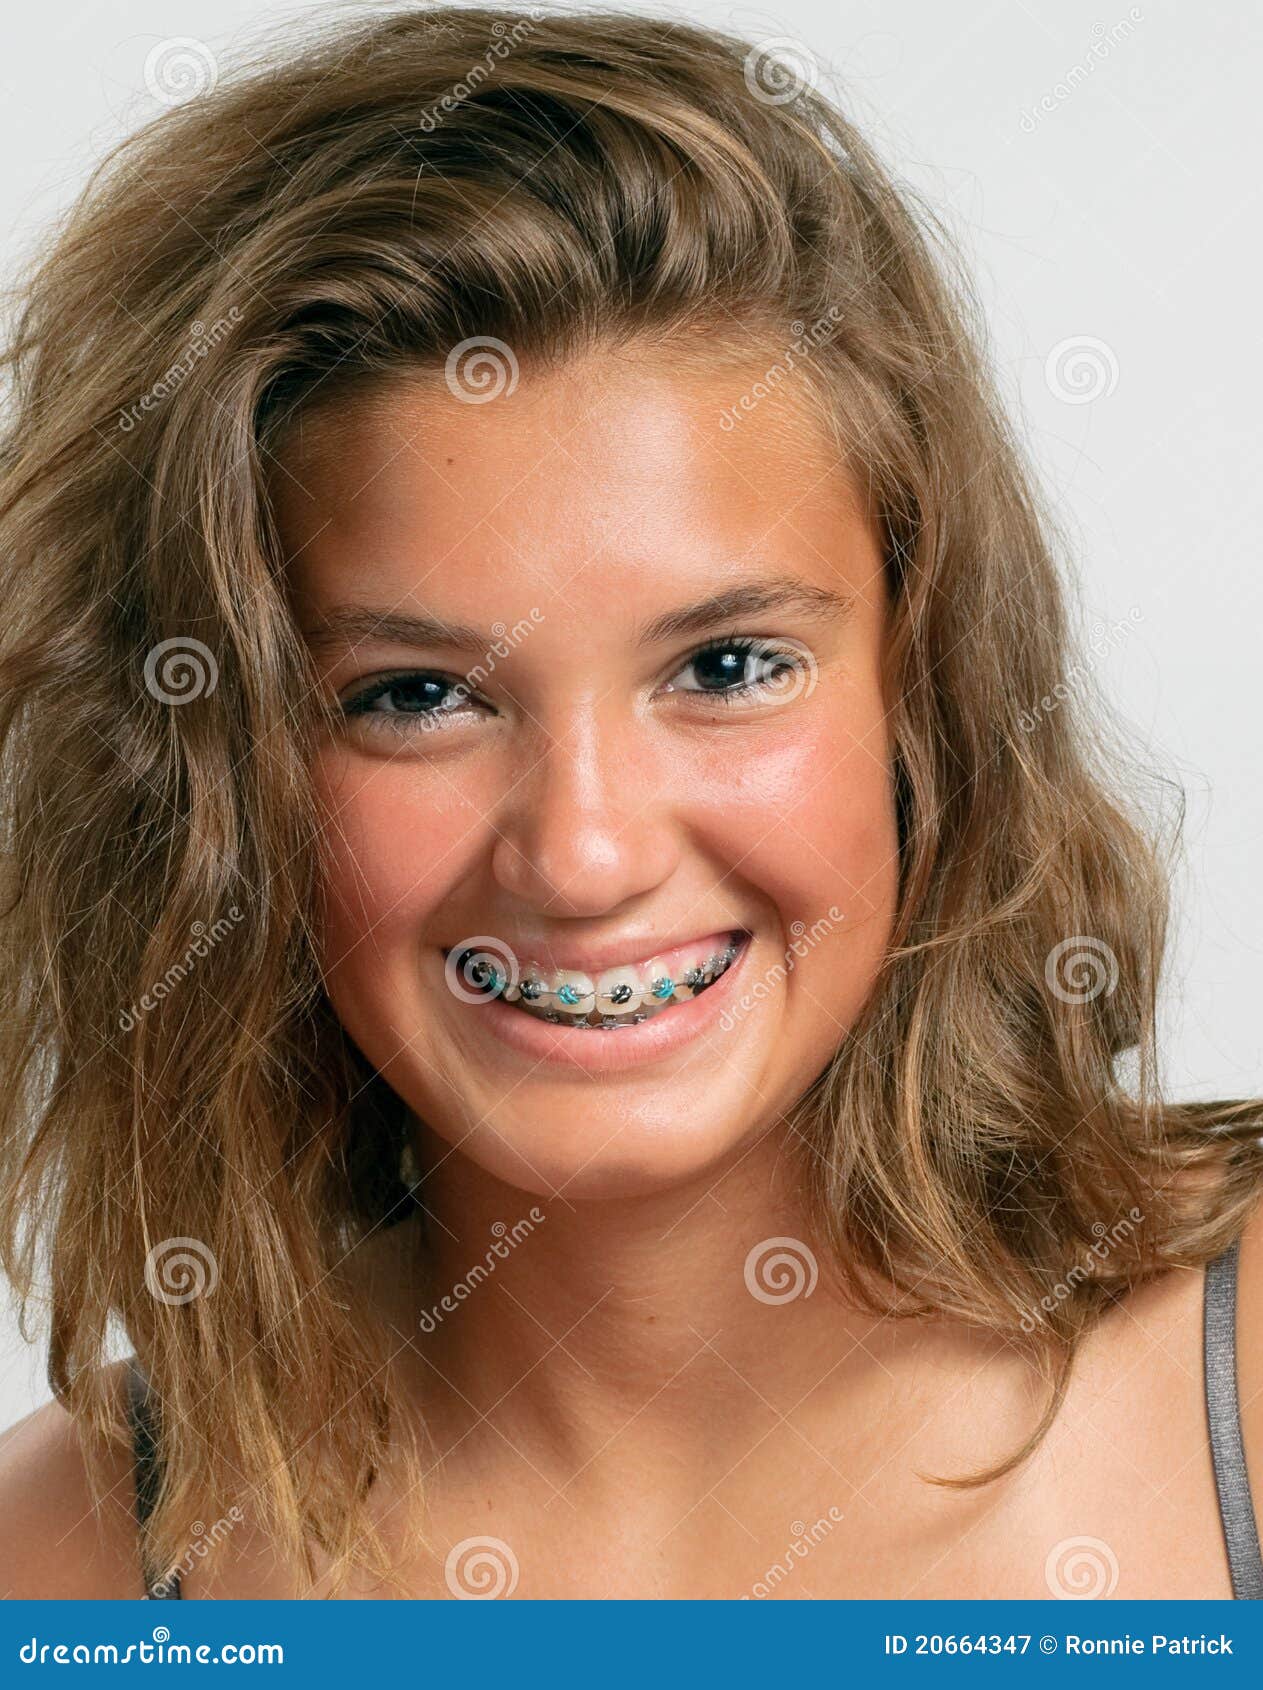 Teen Girl With Blue Braces Royalty Free Stock Photogr